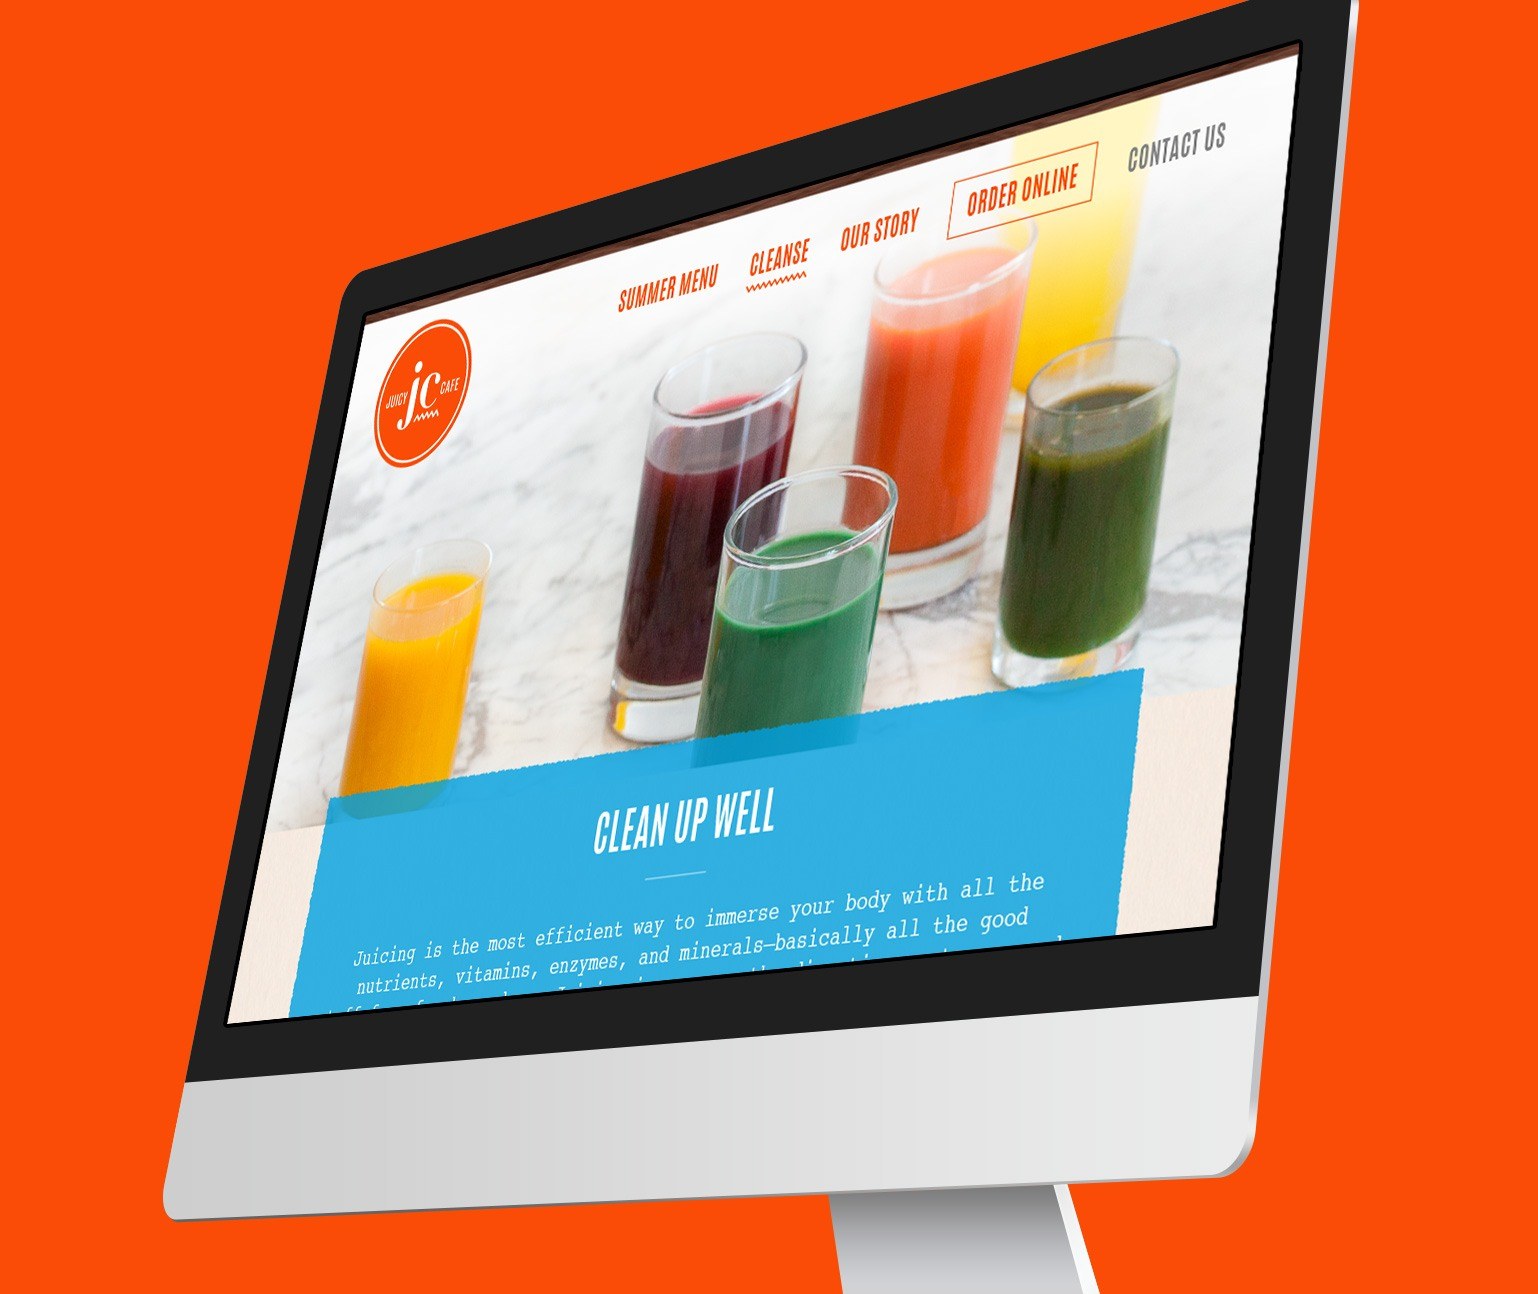 Juicy Cafe website design shown on computer monitor with an orange background